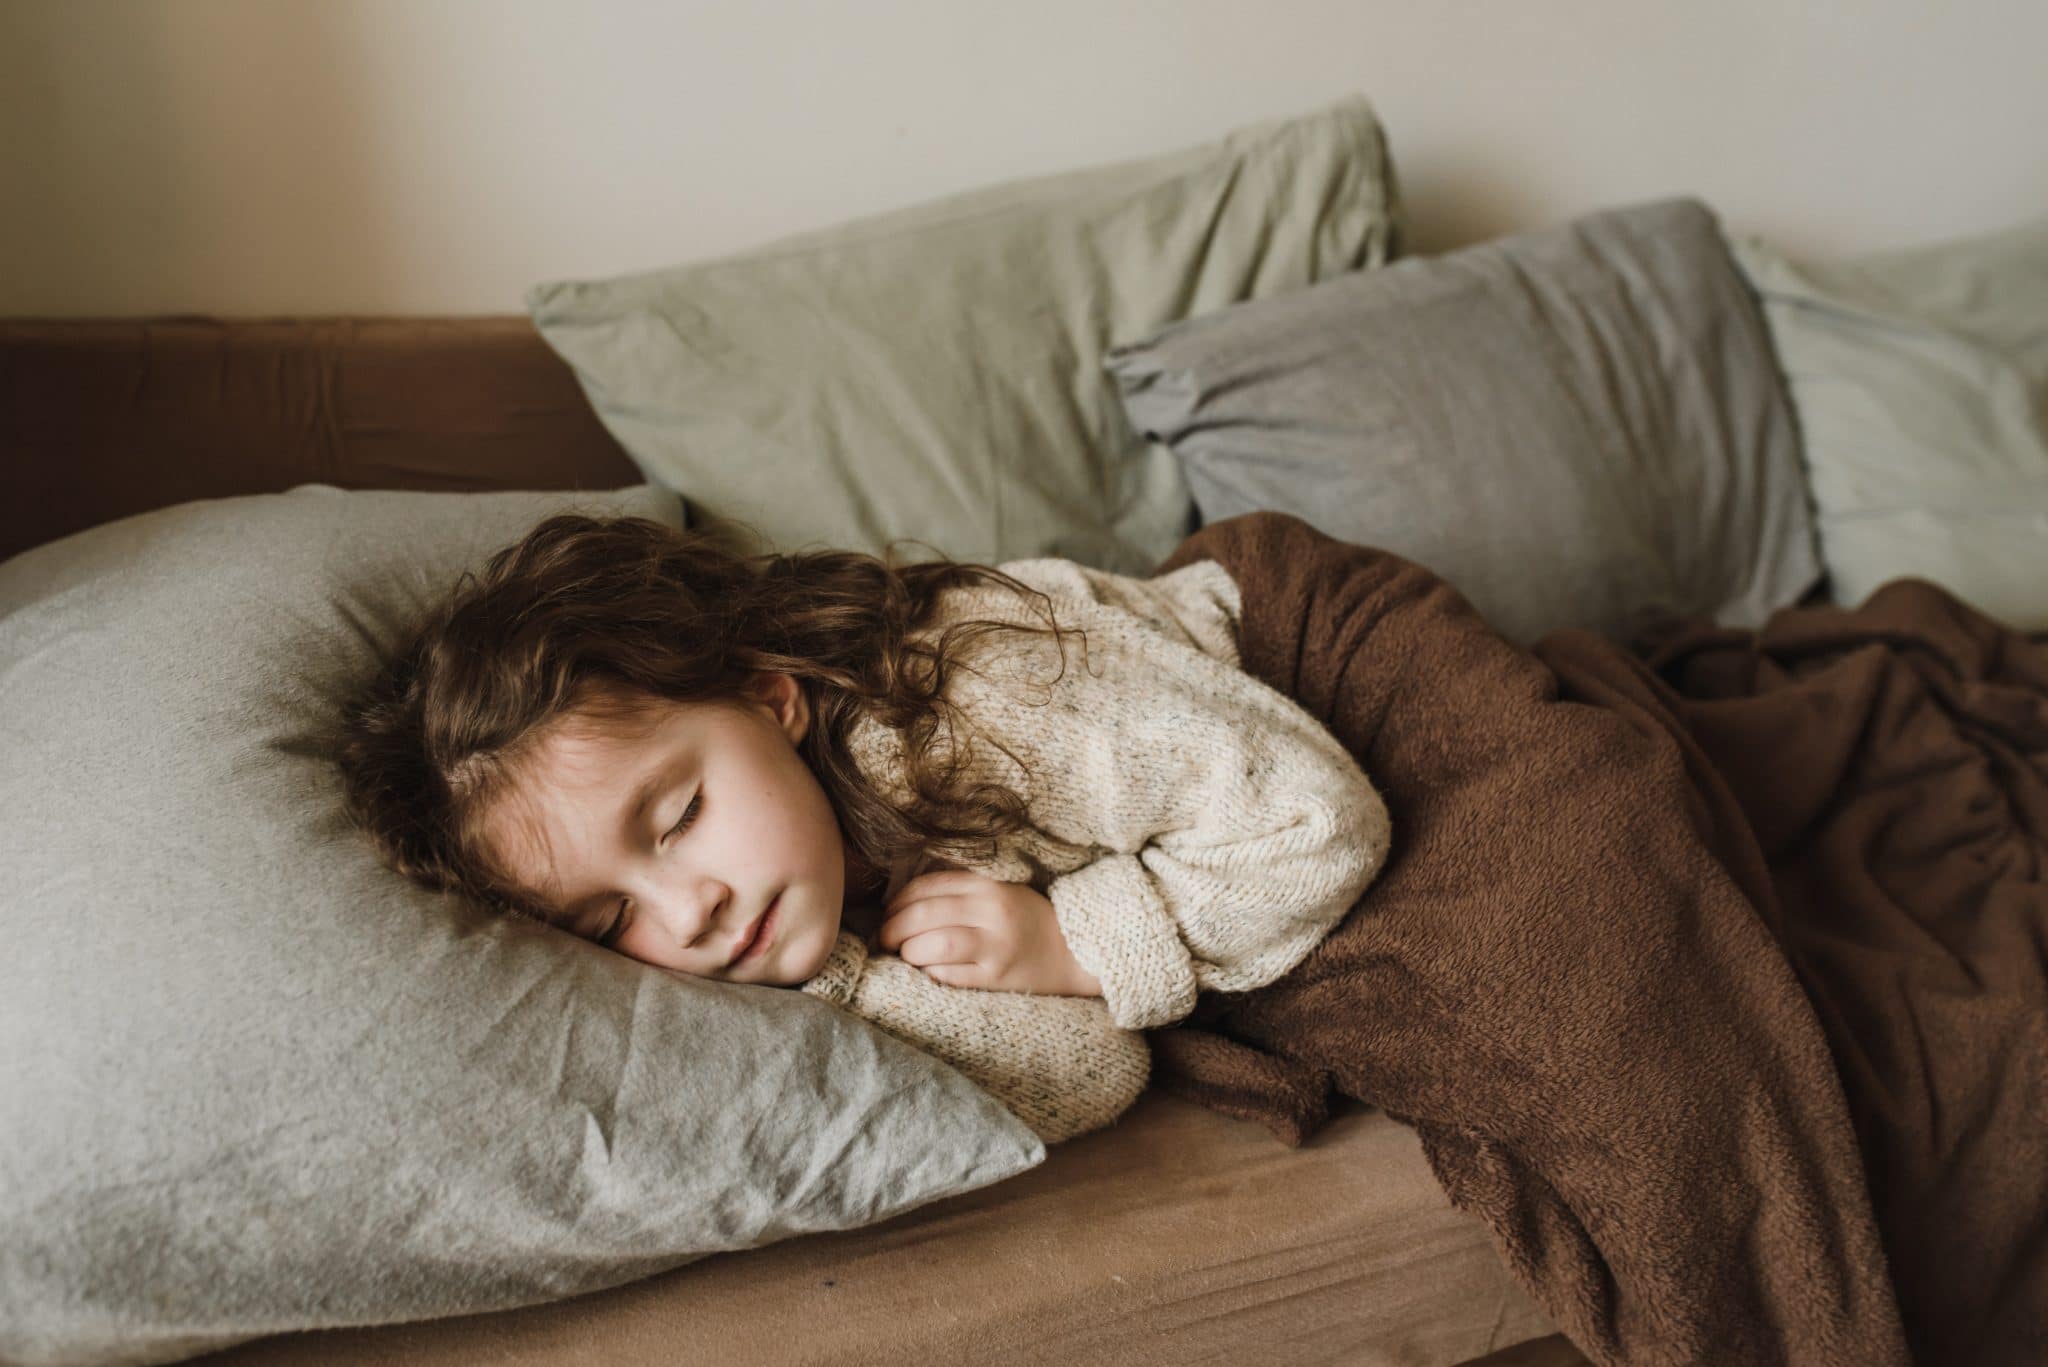 Does Your Child Snore? When It's Not Normal